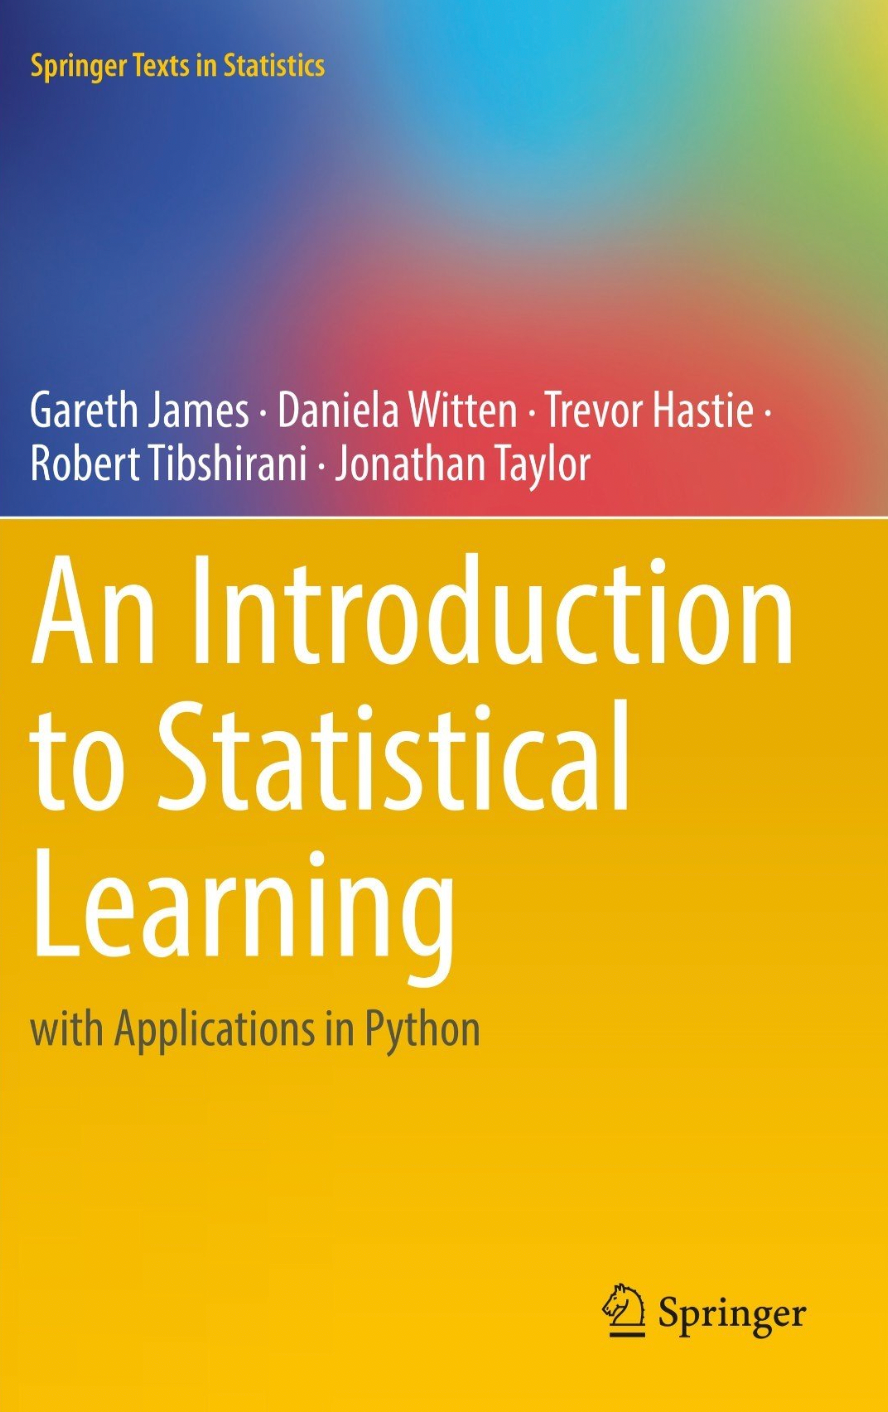 An Introduction to Statistical Learning in Python